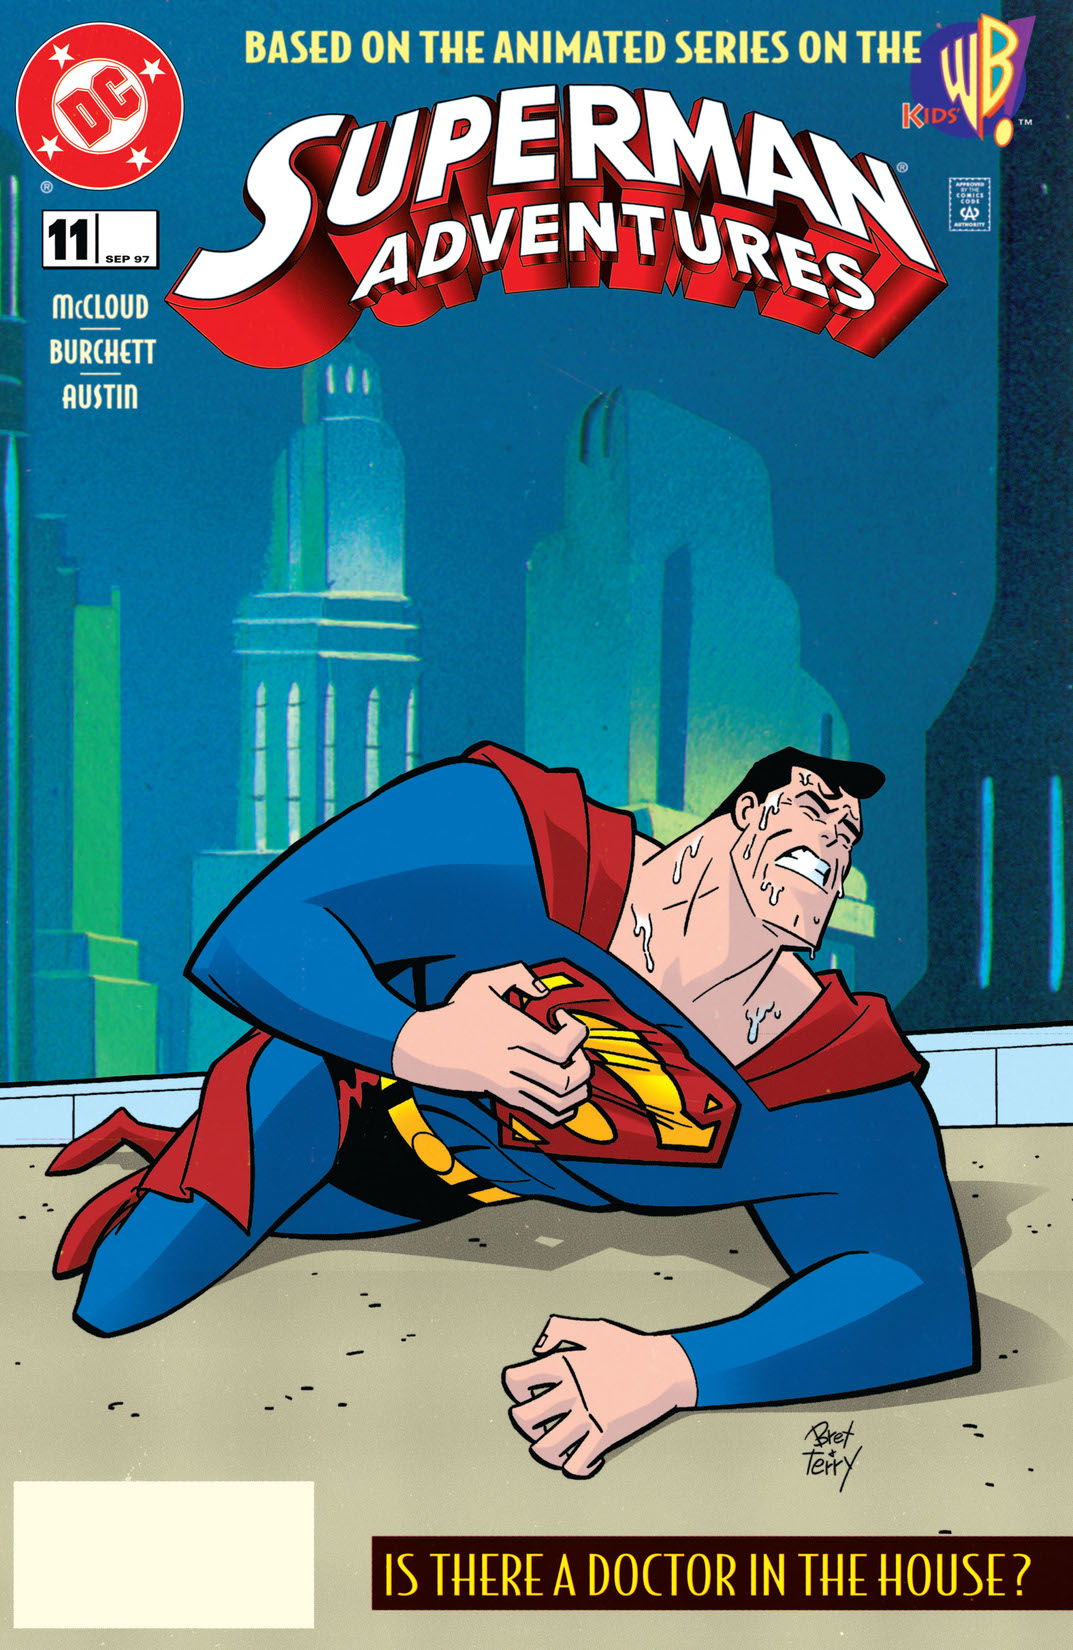 Superman Adventures #11 preview images